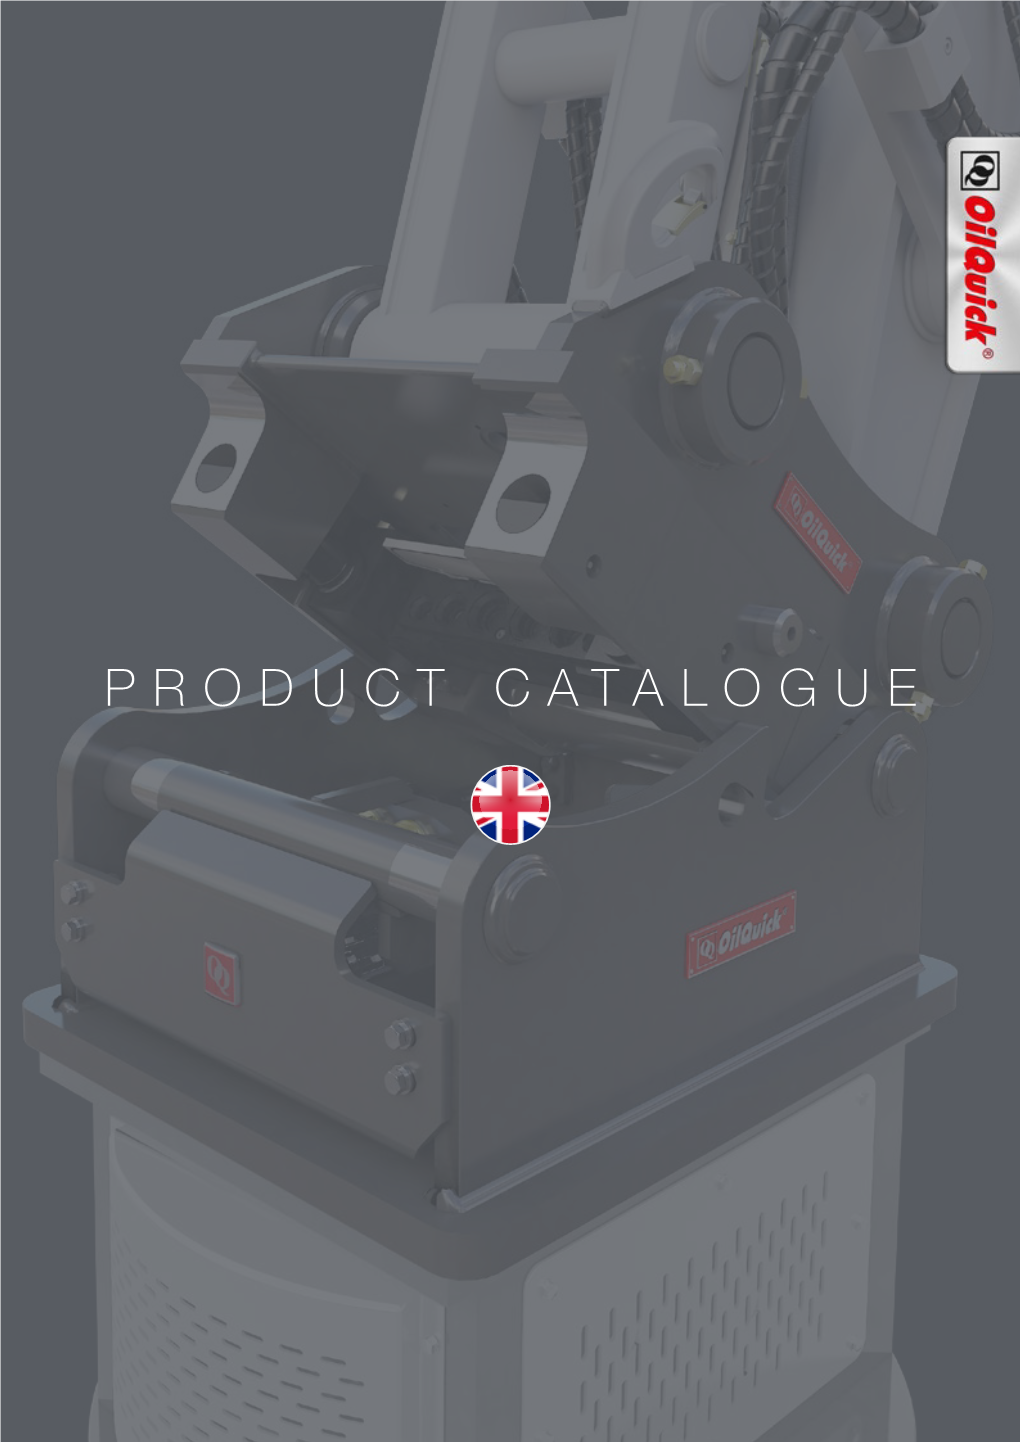 Product Catalogue Content